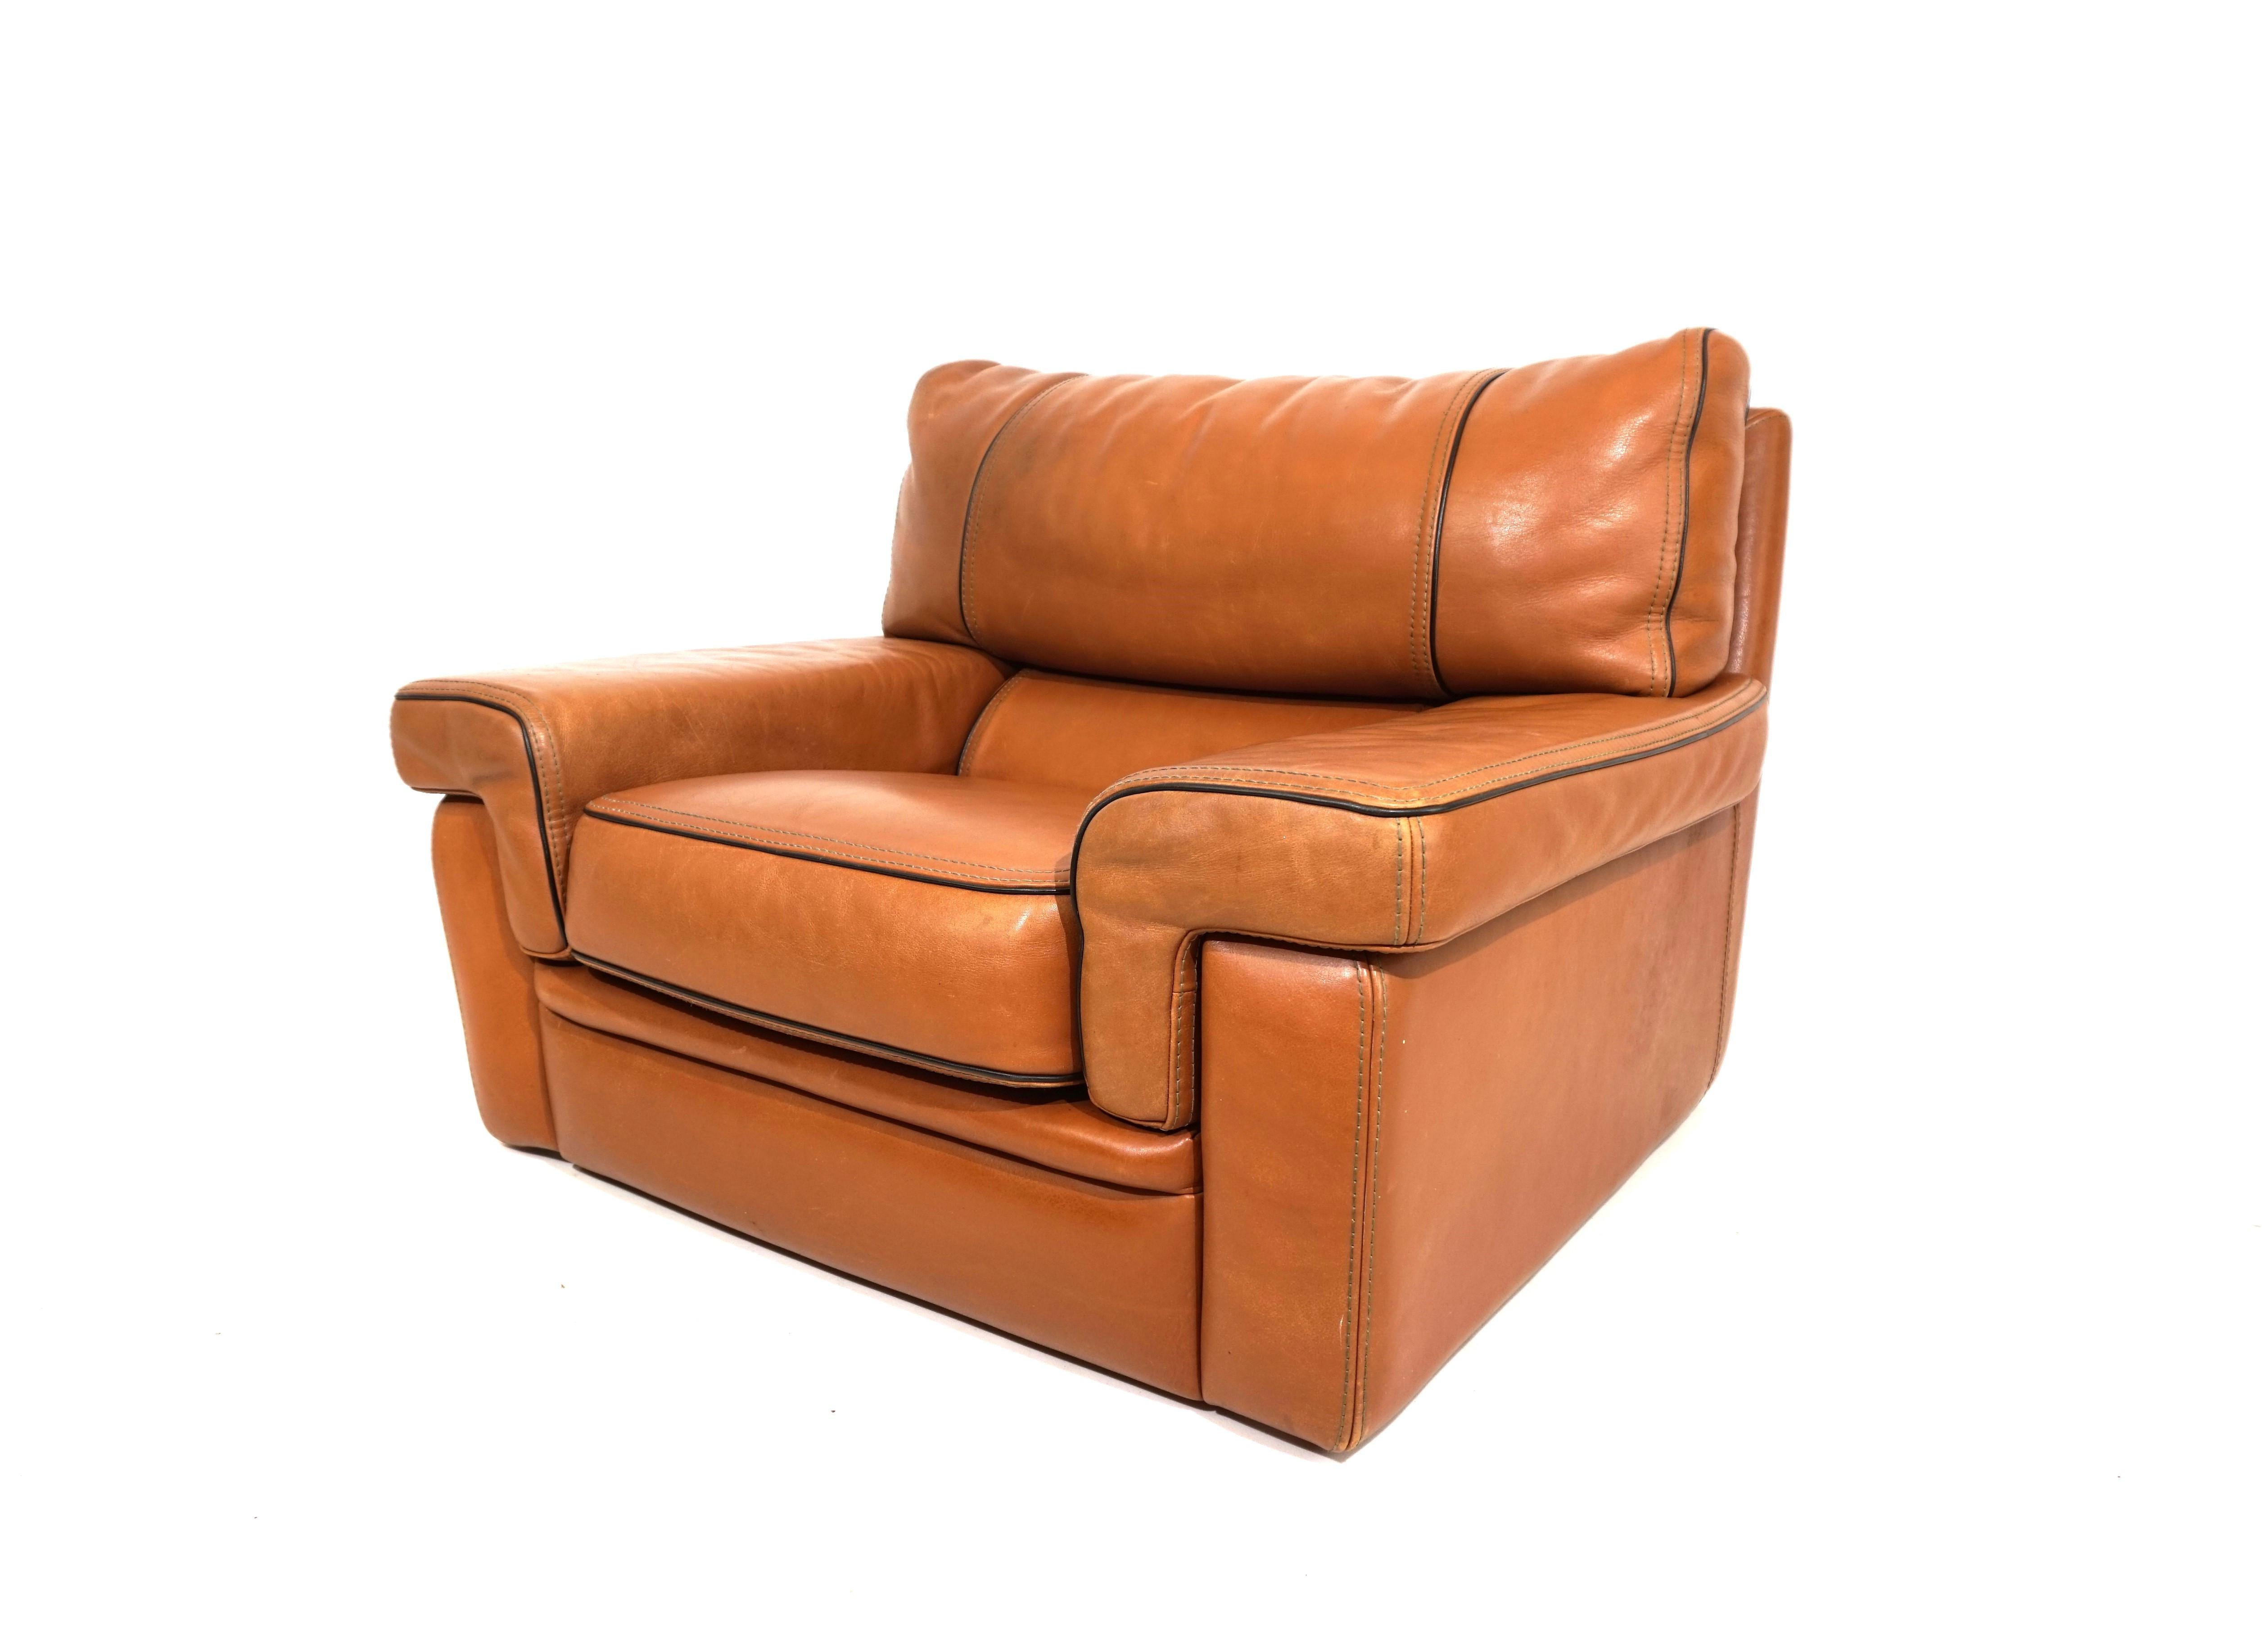 This brown, solid leather armchair made in the thick leather variant typical of Roche Bobois is in very good condition. The armchair,  in a whiskey-colored leather tone, shows minimal signs of wear, only a few stains on the back of the chair. The